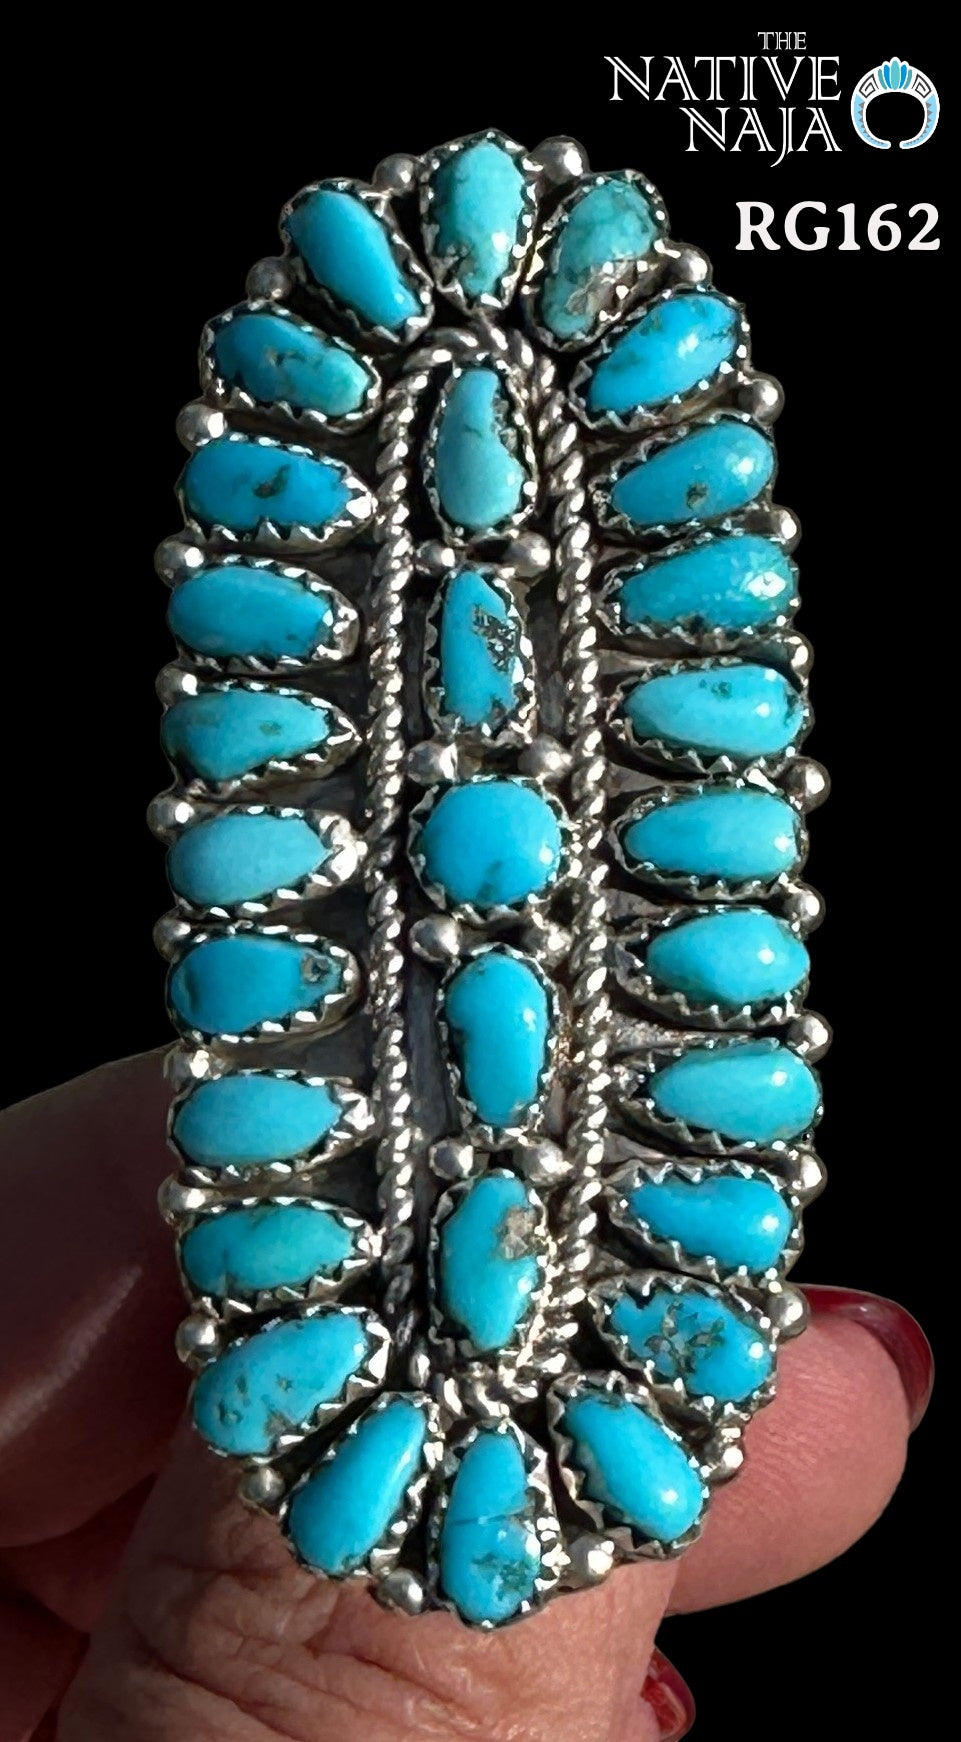 LRG Navajo Justina Wilson Petit Point Turquoise & Sterling Silver Ring Size 7 1/2 RG162